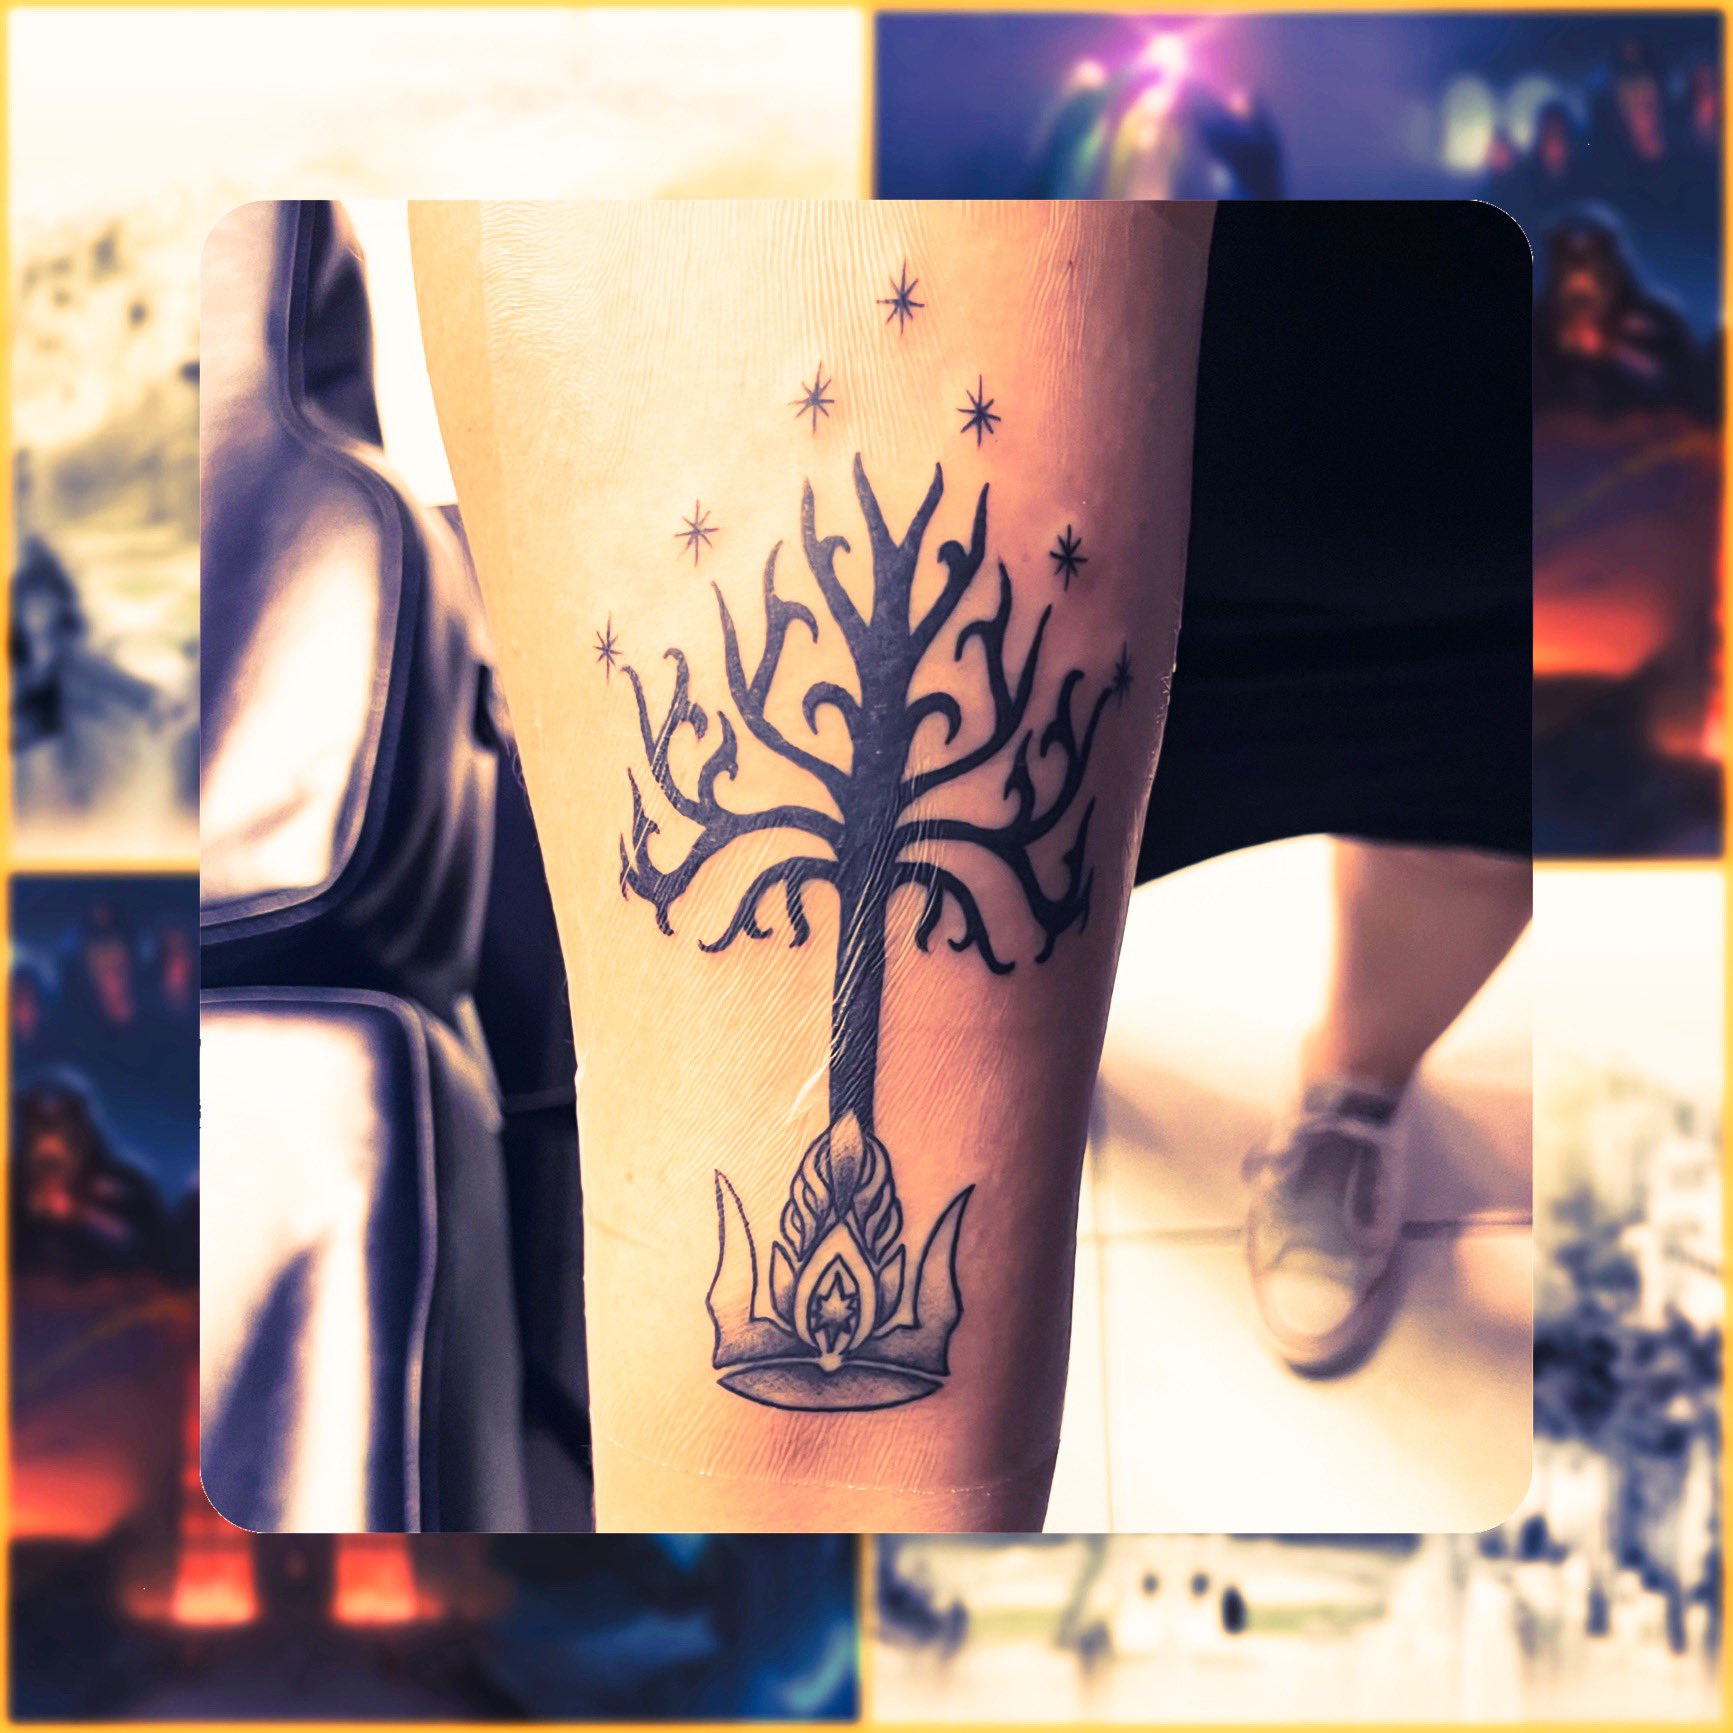 Tree of Gondor tattoo I got done over the weekend  rlotr